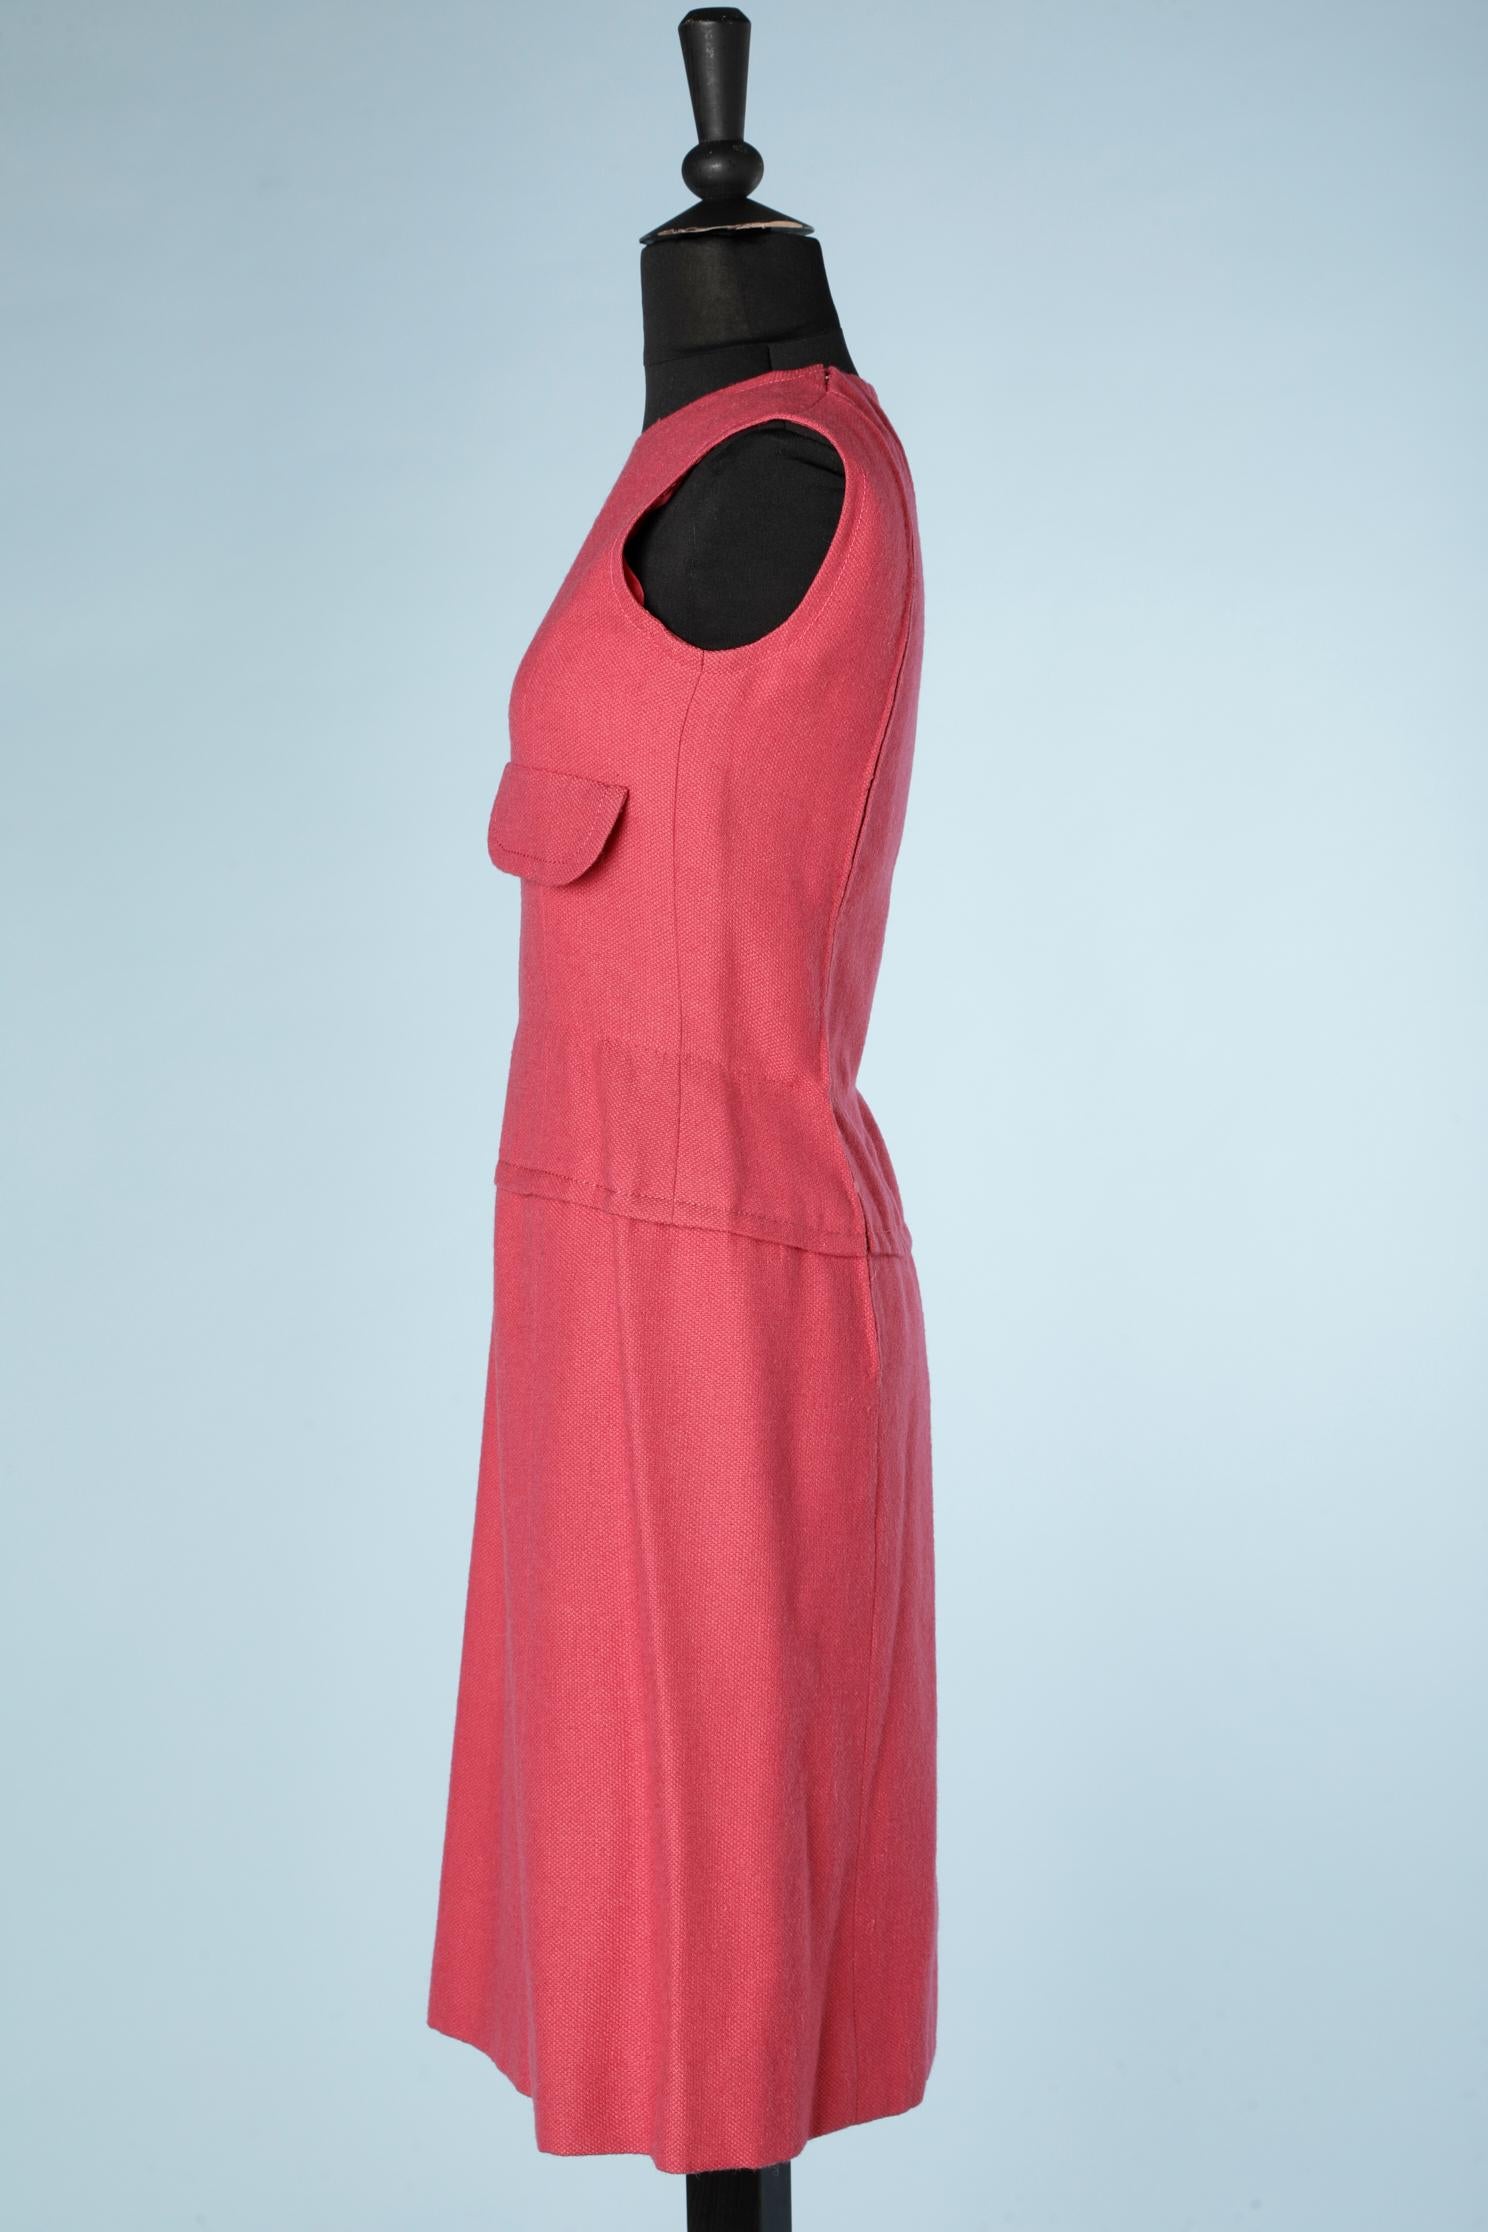 Sleeveless pink wool cocktail dress Guy Laroche Circa 1960's  In Excellent Condition For Sale In Saint-Ouen-Sur-Seine, FR